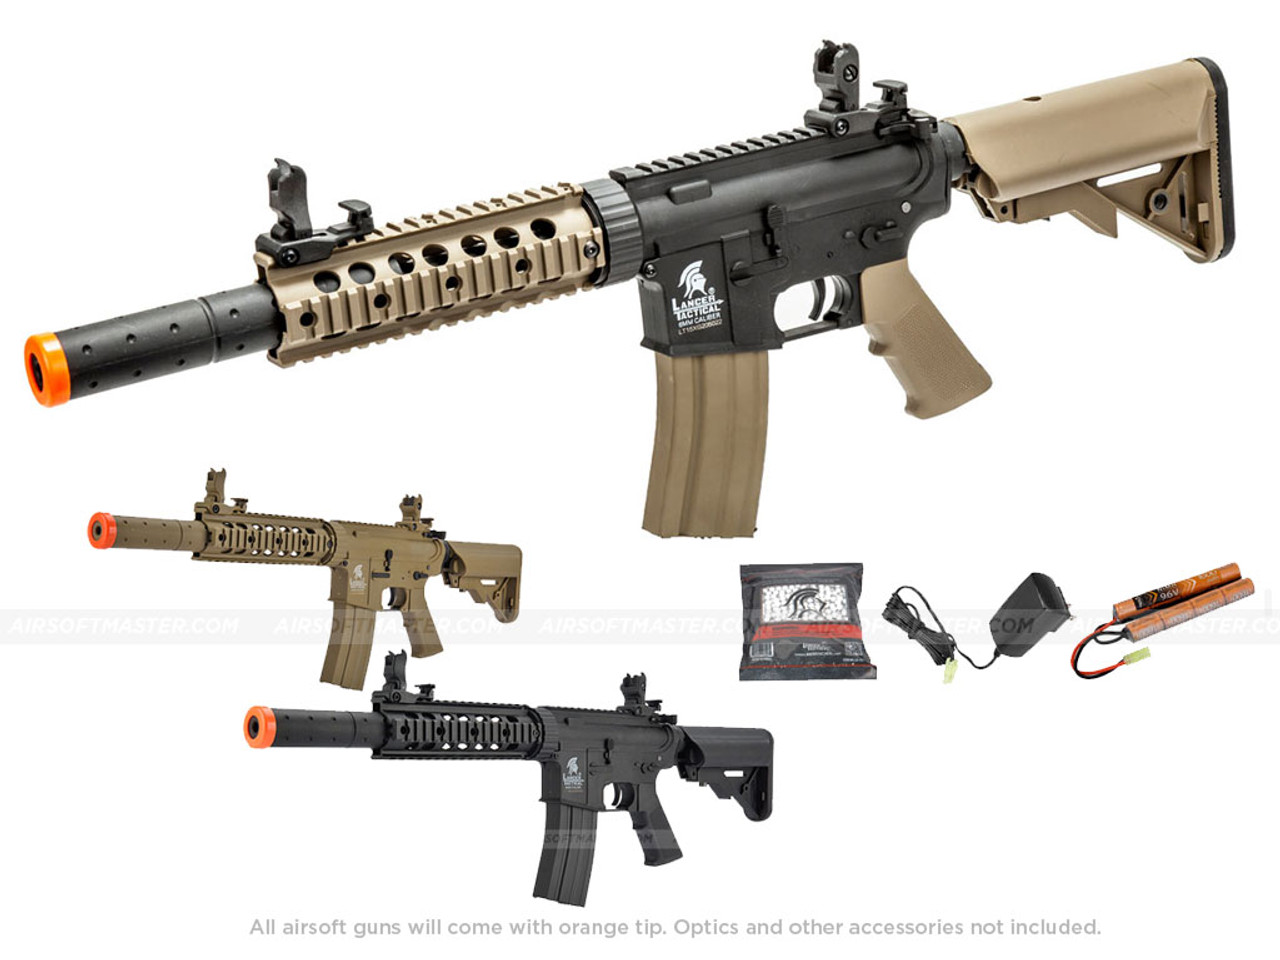 The Airsoft Arena - Airsoft Guns, Tactical Gear, Airsoft Accessories